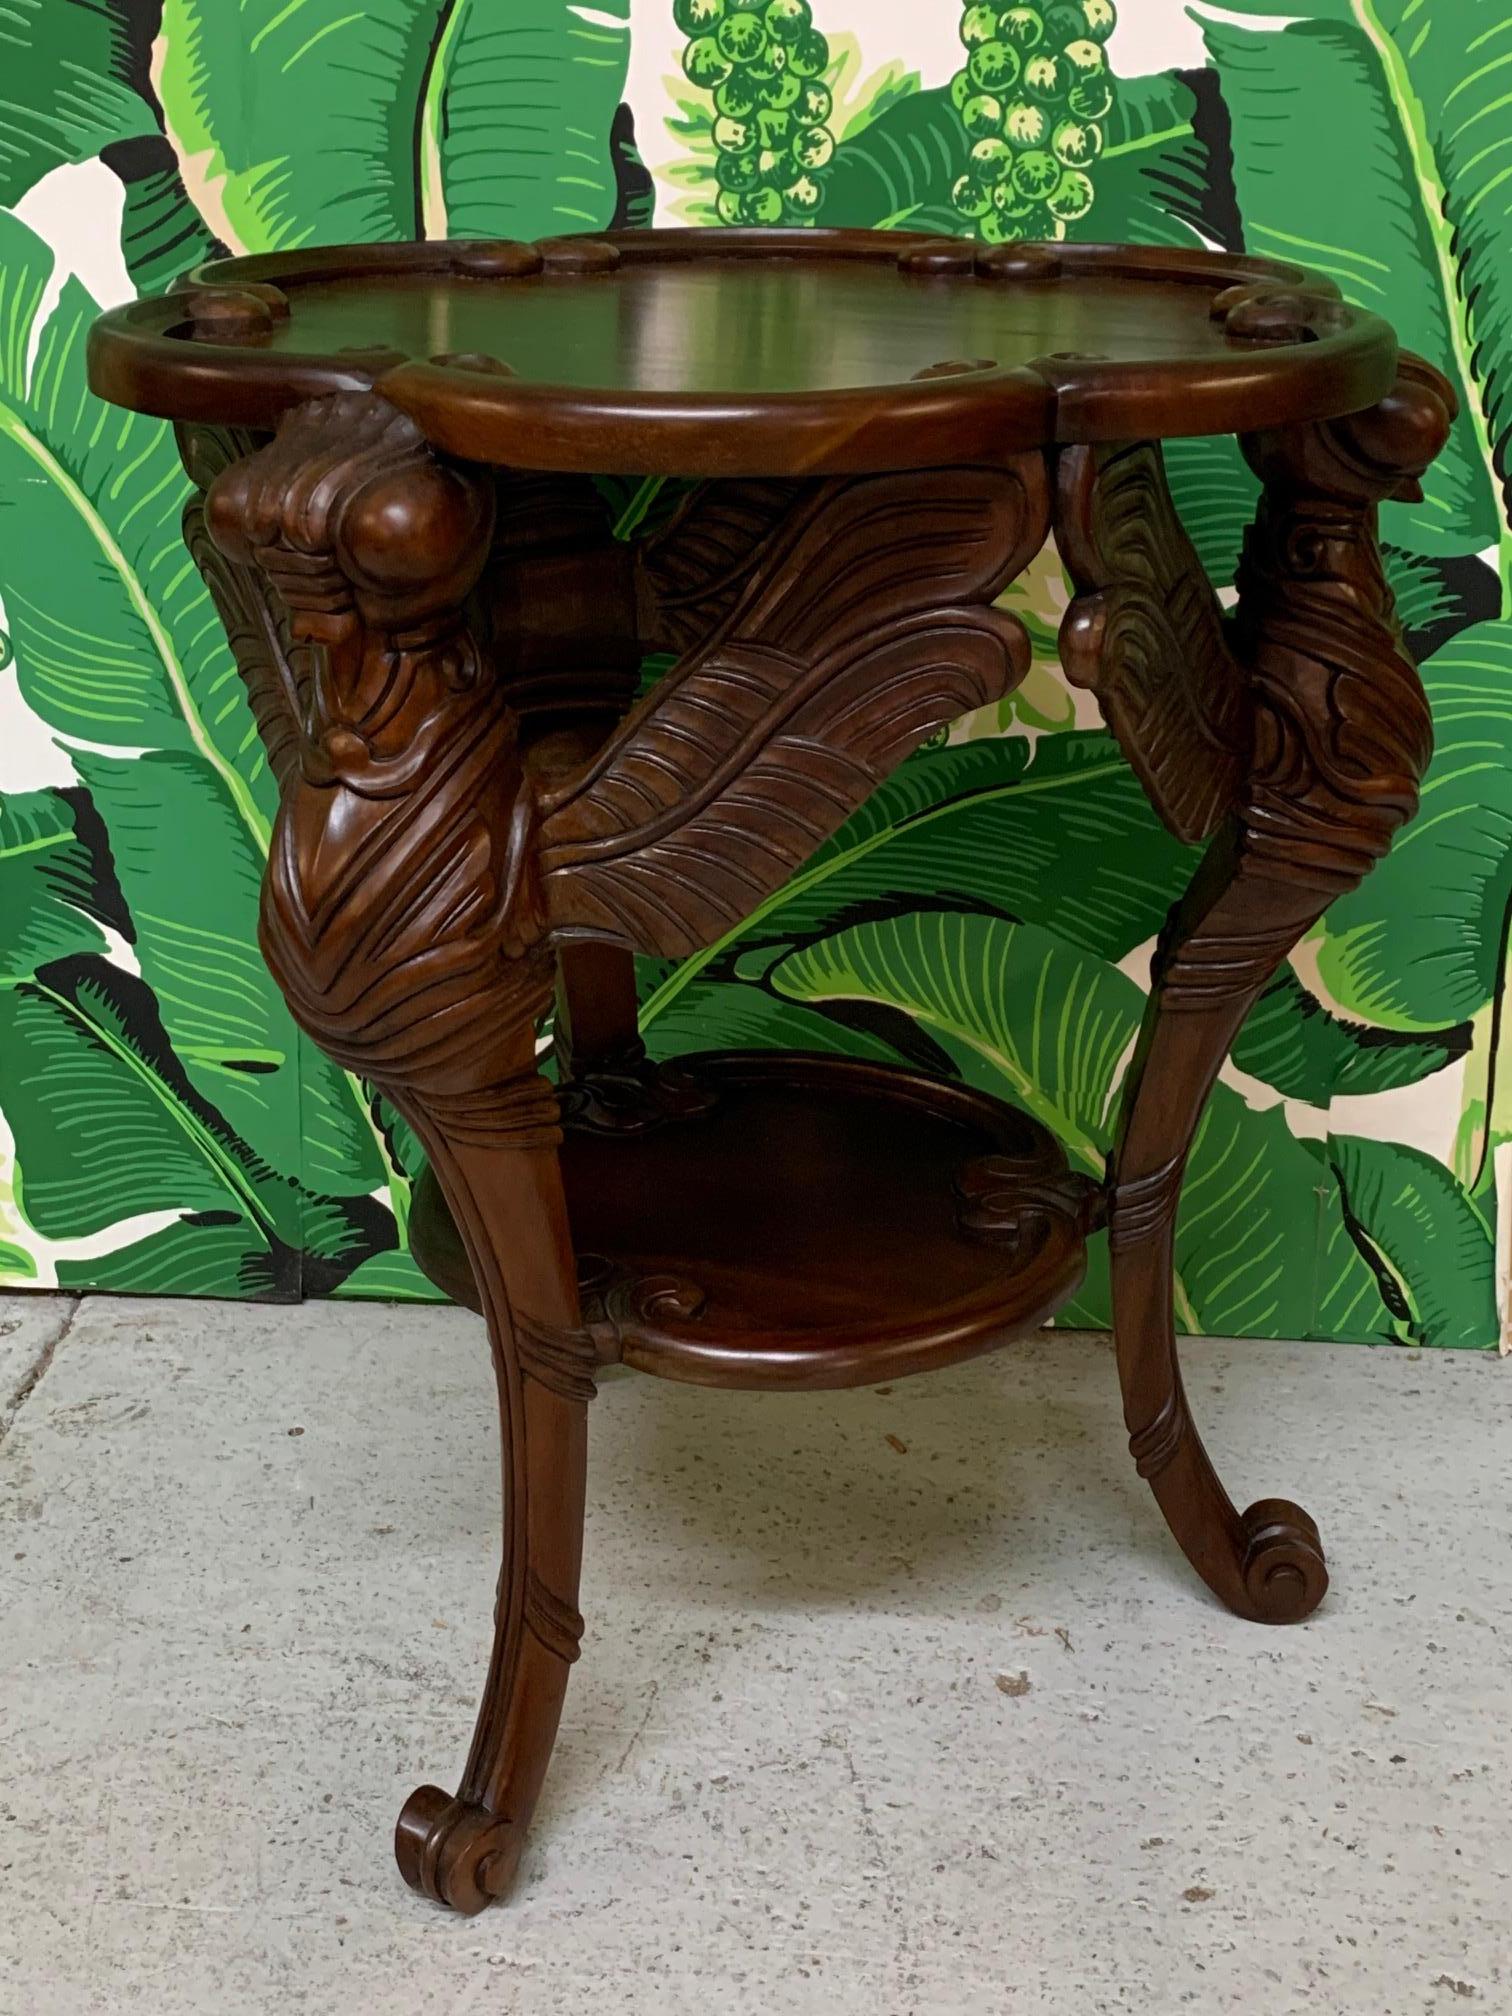 Unique end table features hand carved dragonfly sculptures as legs. Rich, dark finish. Condition is almost like new.